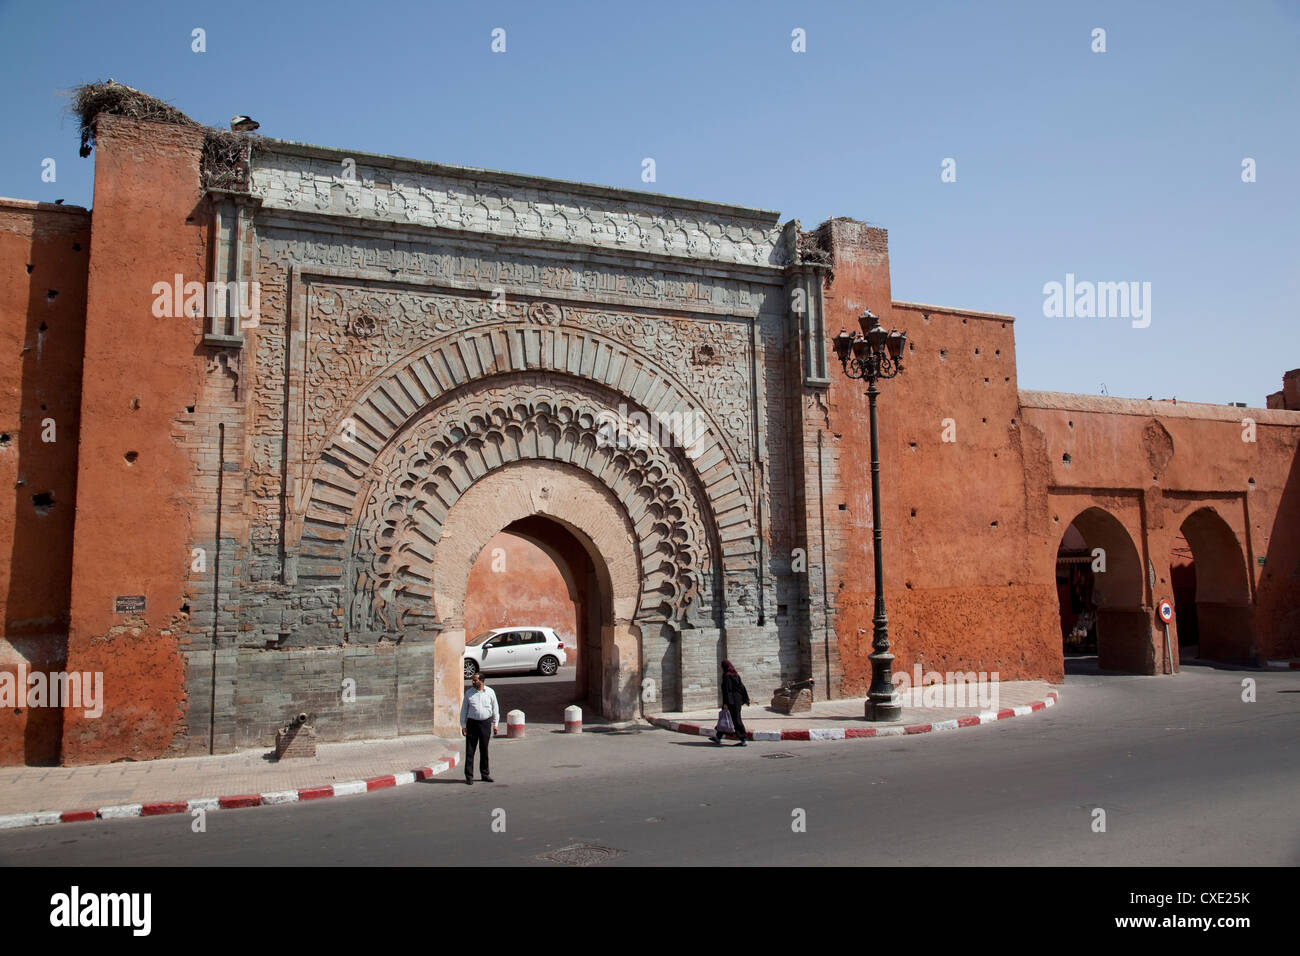 City Gate vicino a Kasbah, Marrakech, Marocco, Africa Settentrionale, Africa Foto Stock